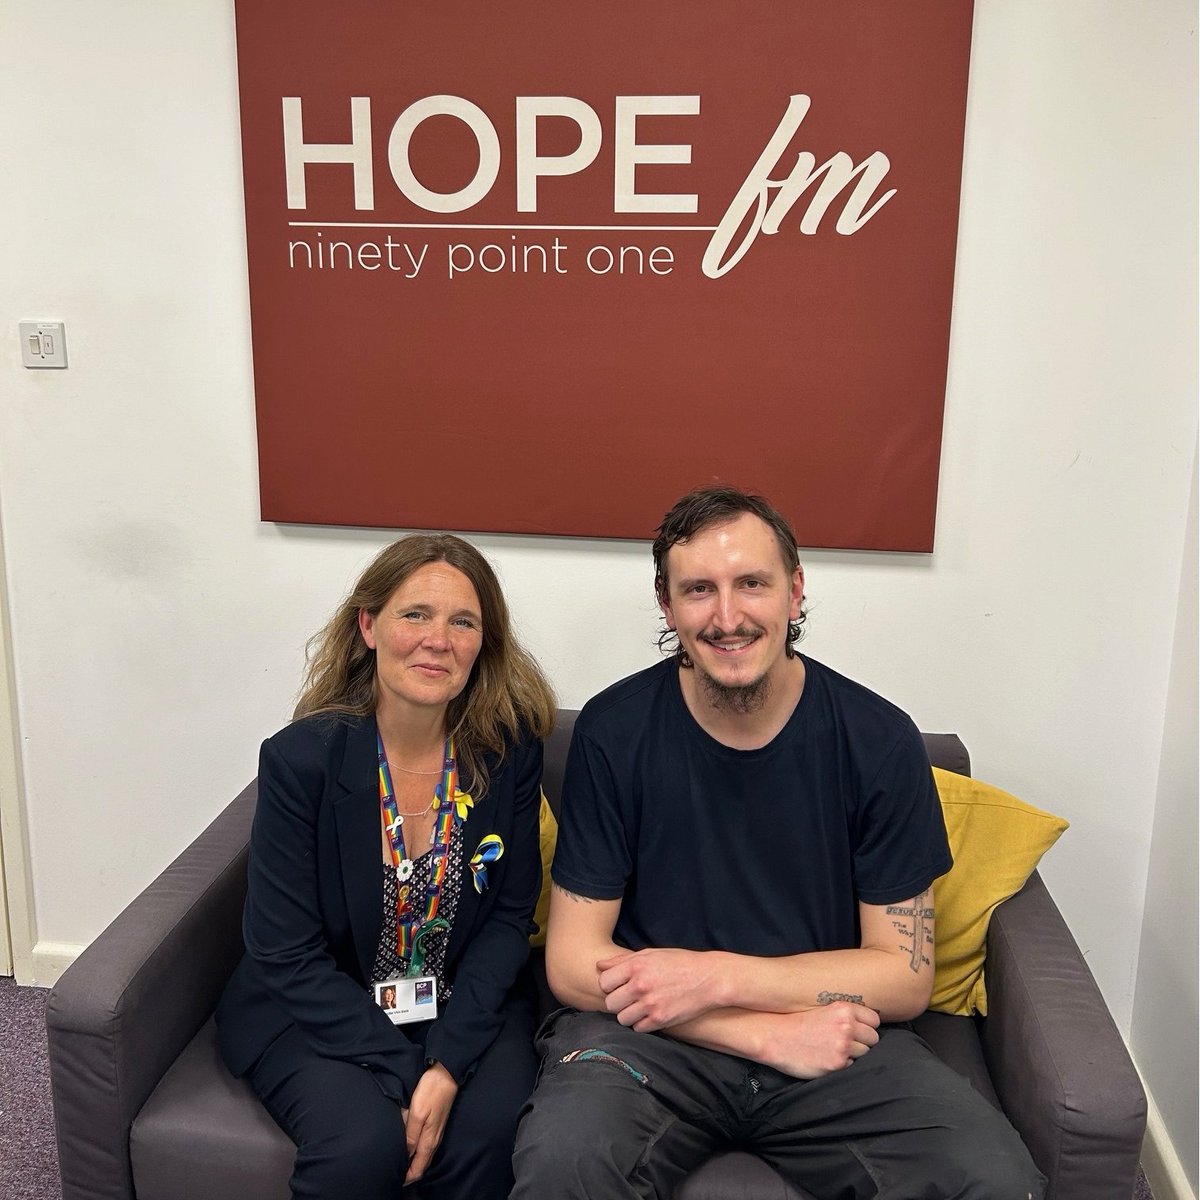 it was a joy to be invited to be in the Hot Seat today on @HopeFM ... chatting about my role as Council Leader, taking their quiz & answering questions from local people. Thrilled to be invited to choose two special songs - In My Life & Dont Stop Believing